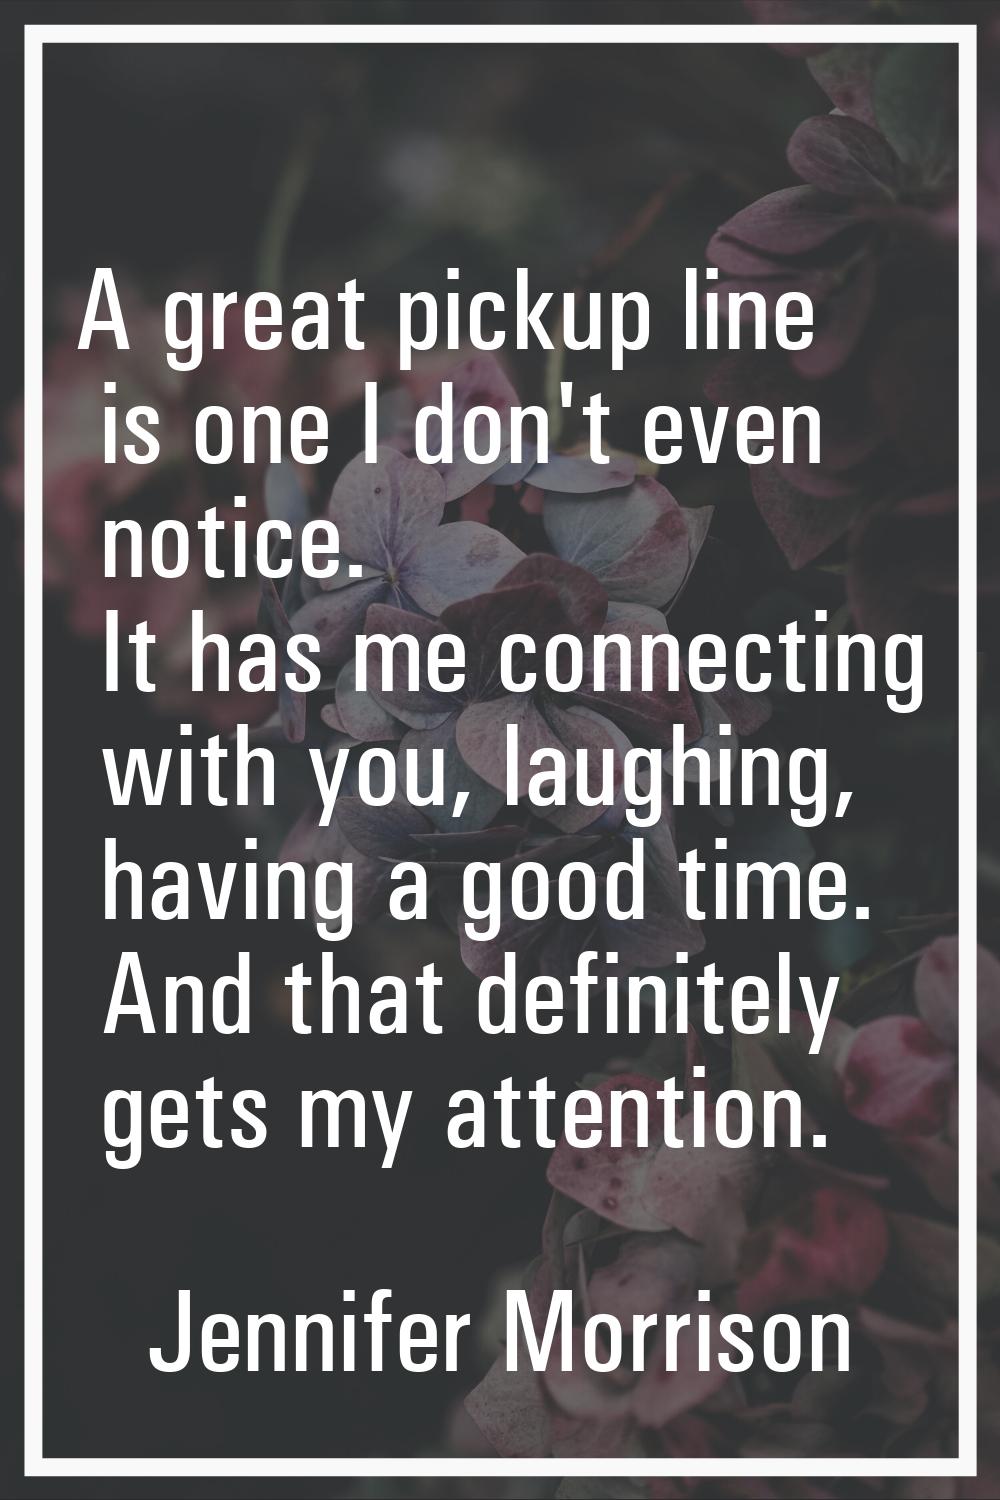 A great pickup line is one I don't even notice. It has me connecting with you, laughing, having a g